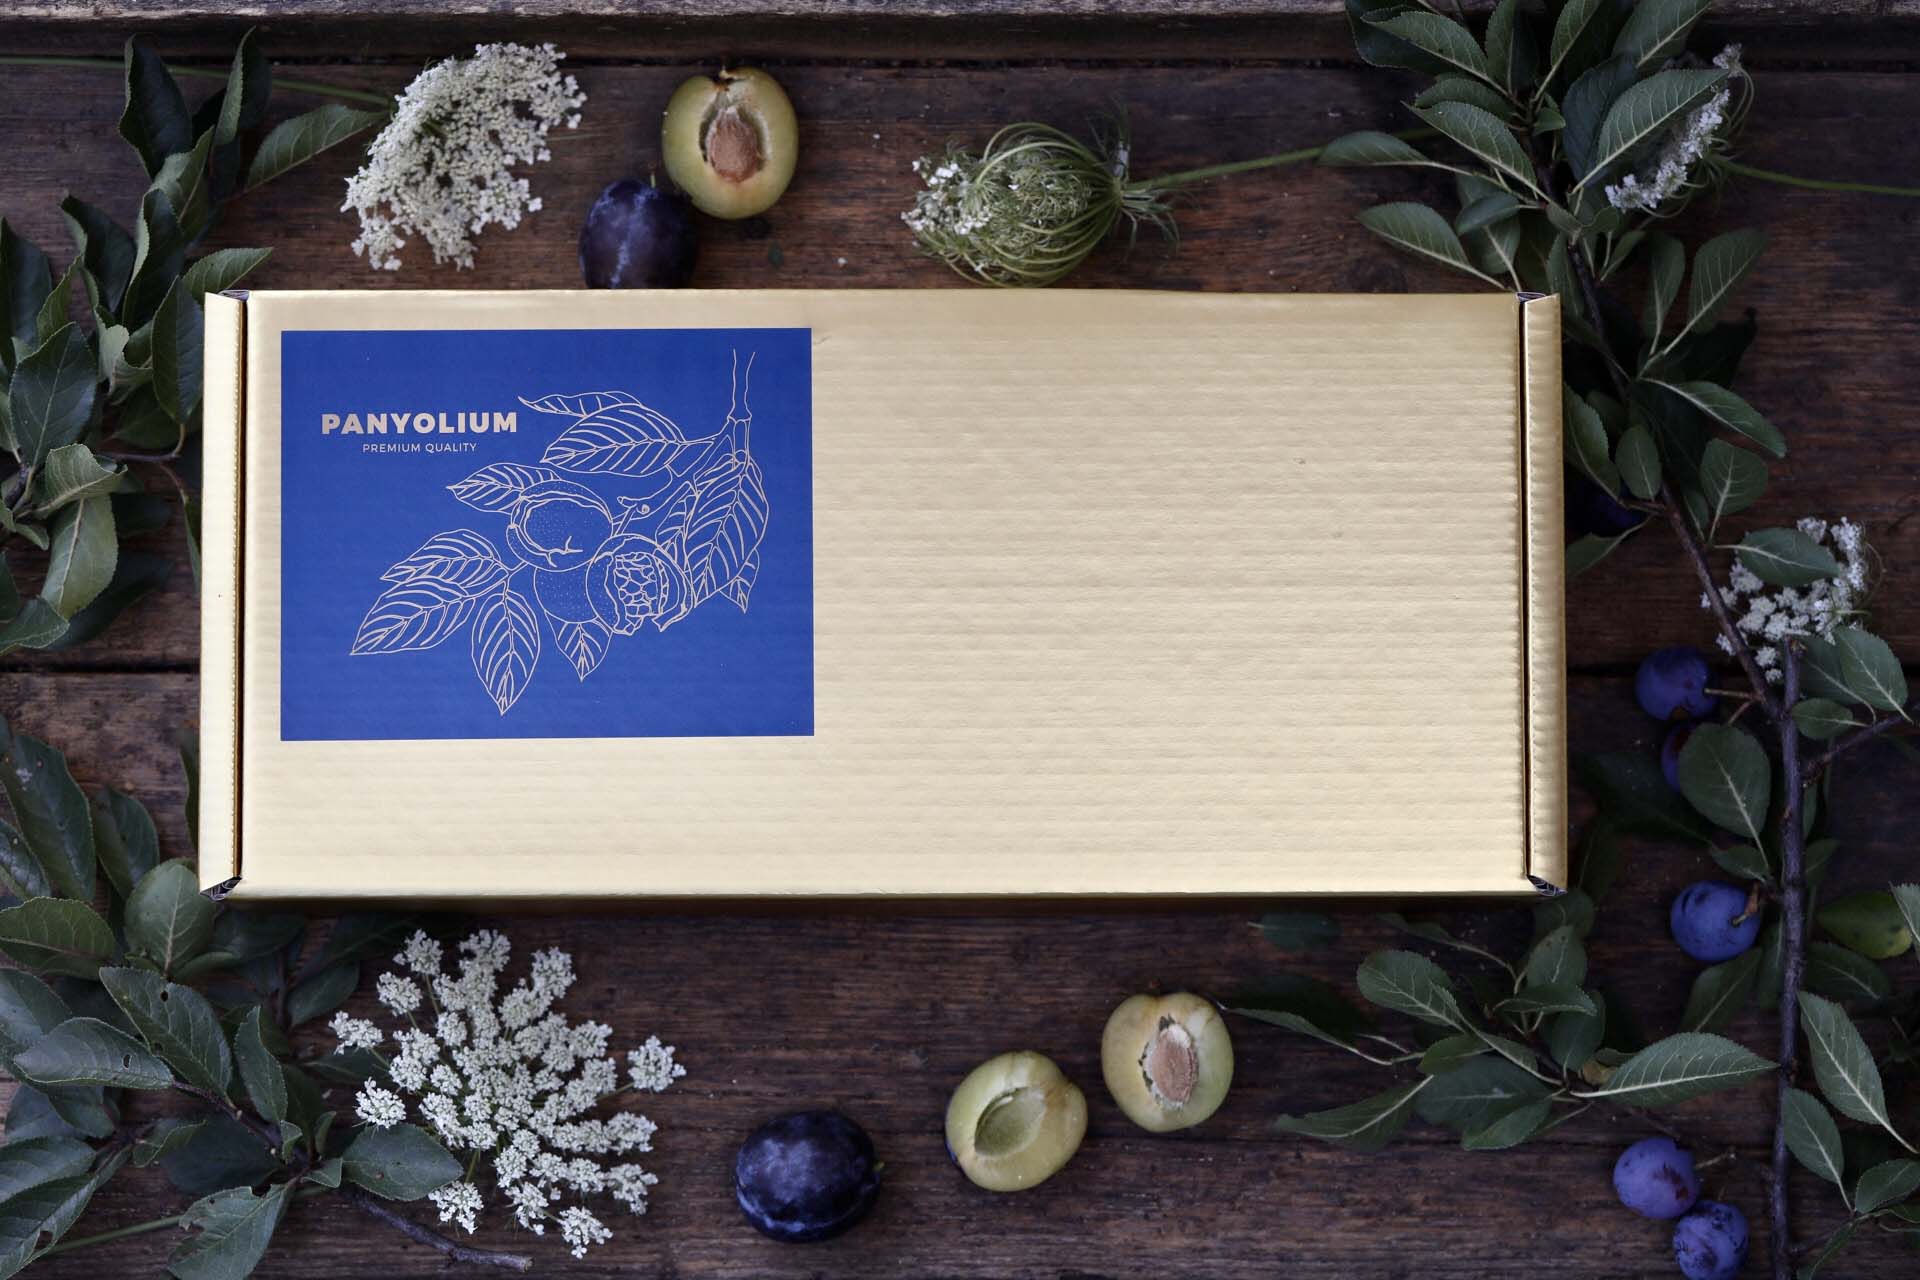 “Jungle fruit from the floodplain” in a majestic packaging | Panyolium